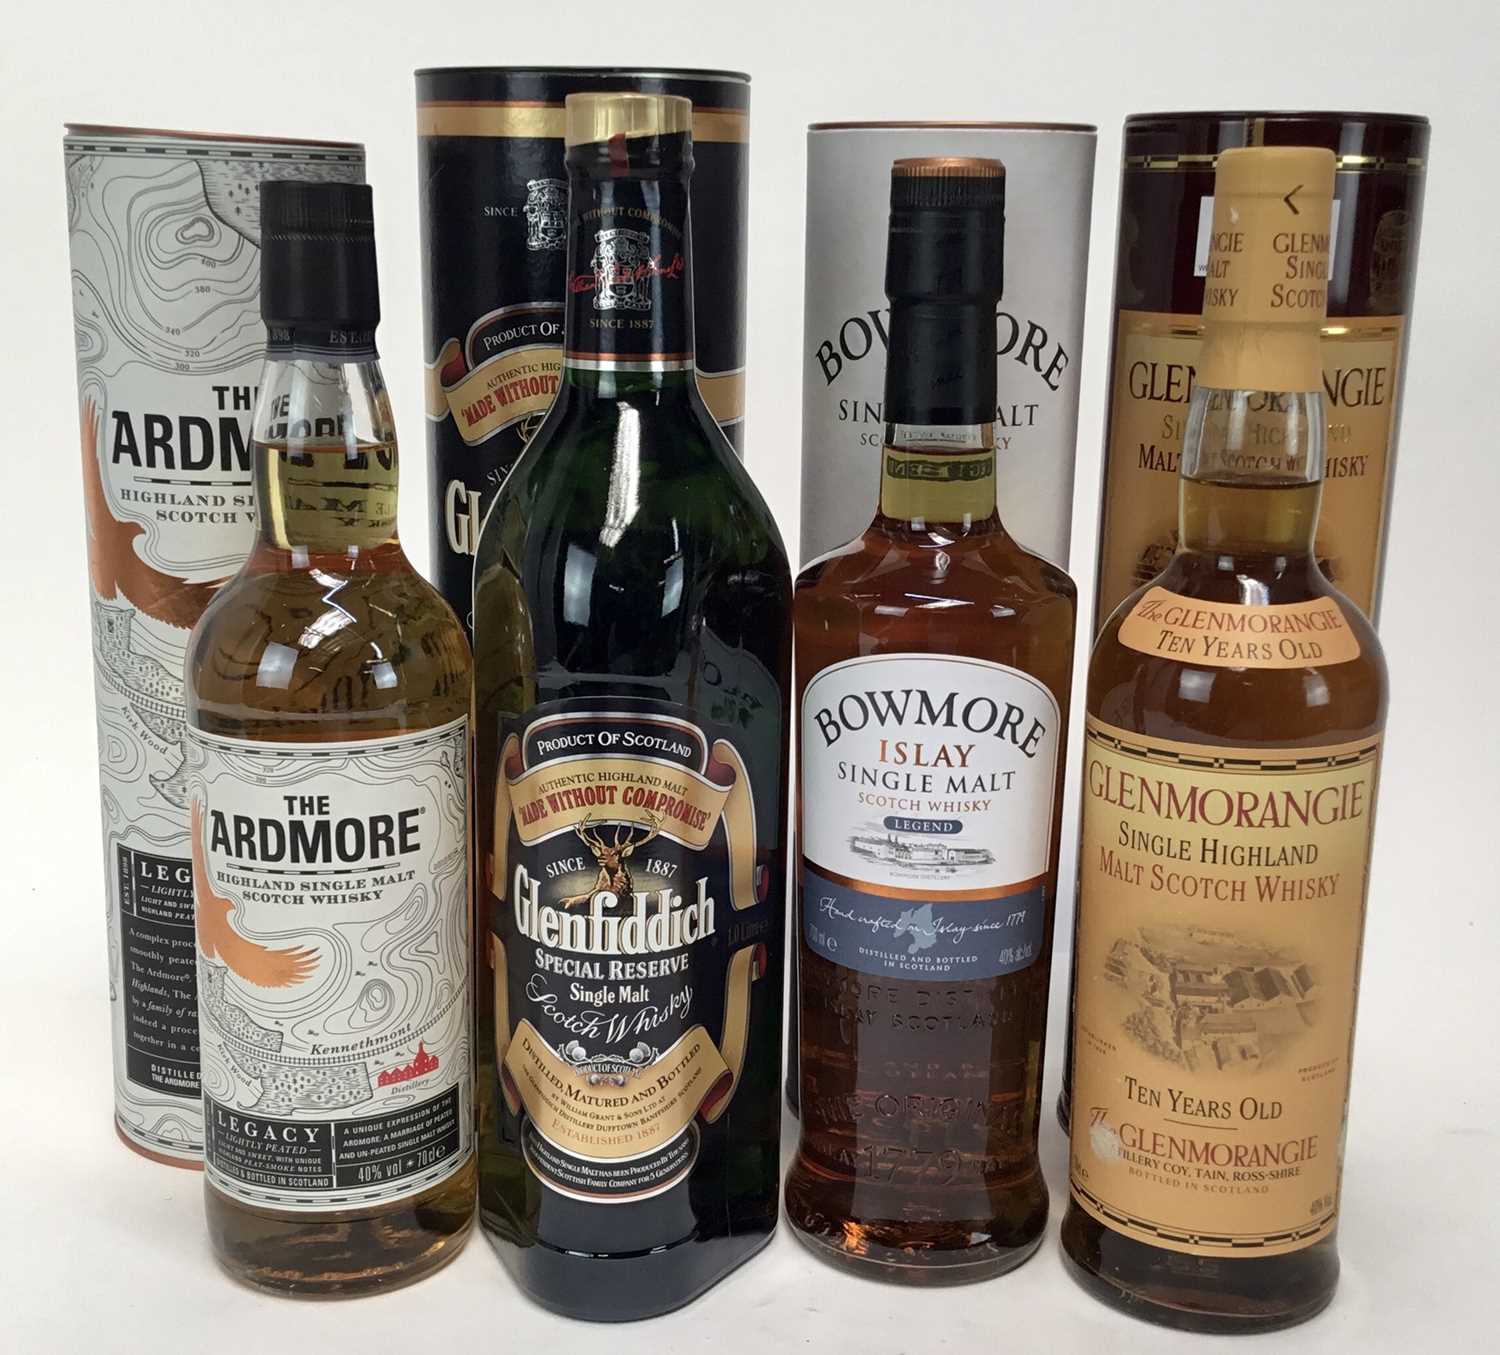 Lot 17 - Whisky - four bottles, Bowmore Islay Single Malt, Genfiddich (1 litre), Glenmorangie Ten Years Old and The Ardmore, each in orignal tube